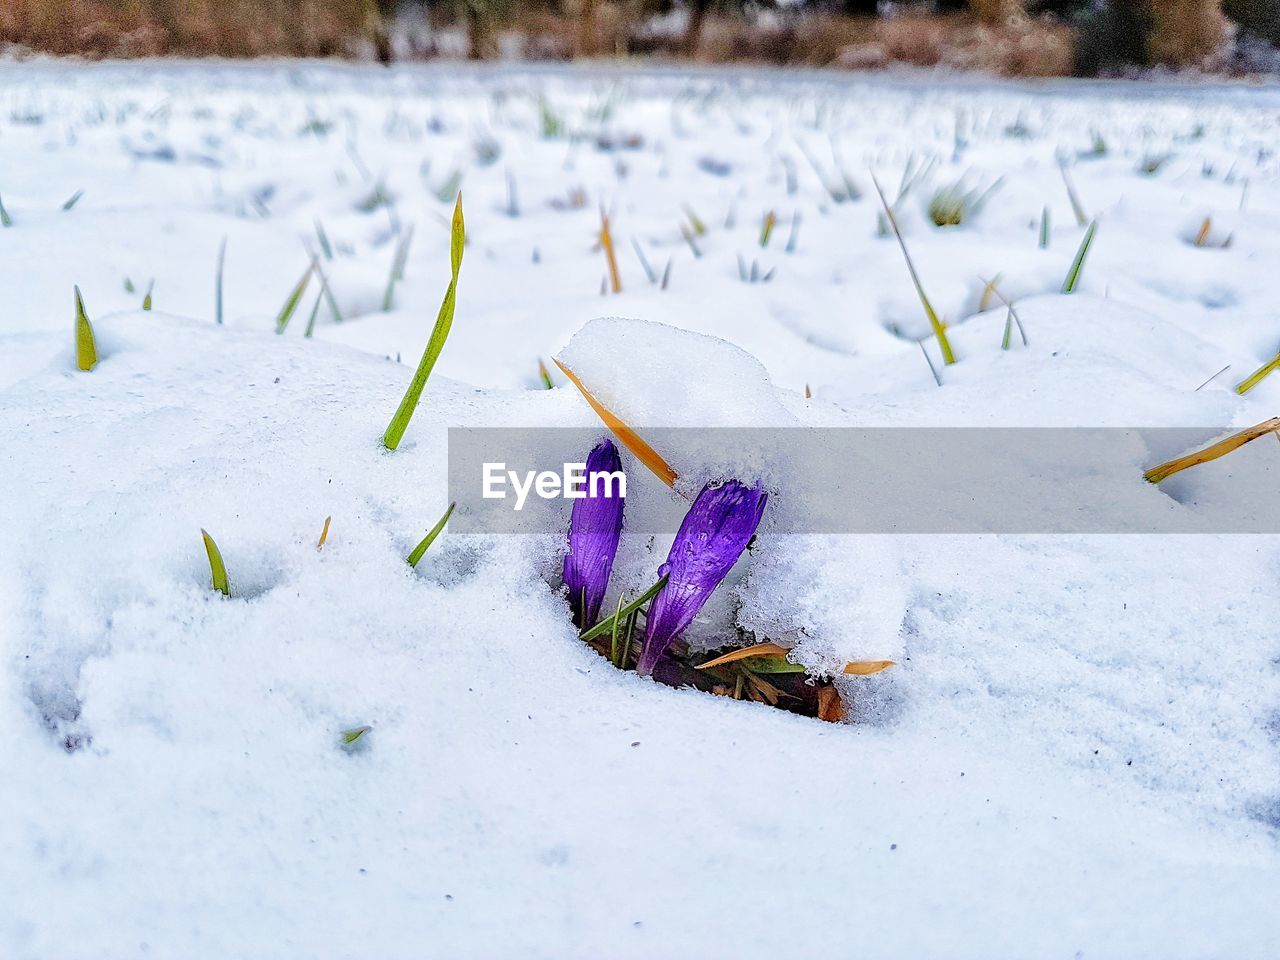 CLOSE-UP OF PLANT ON SNOW FIELD